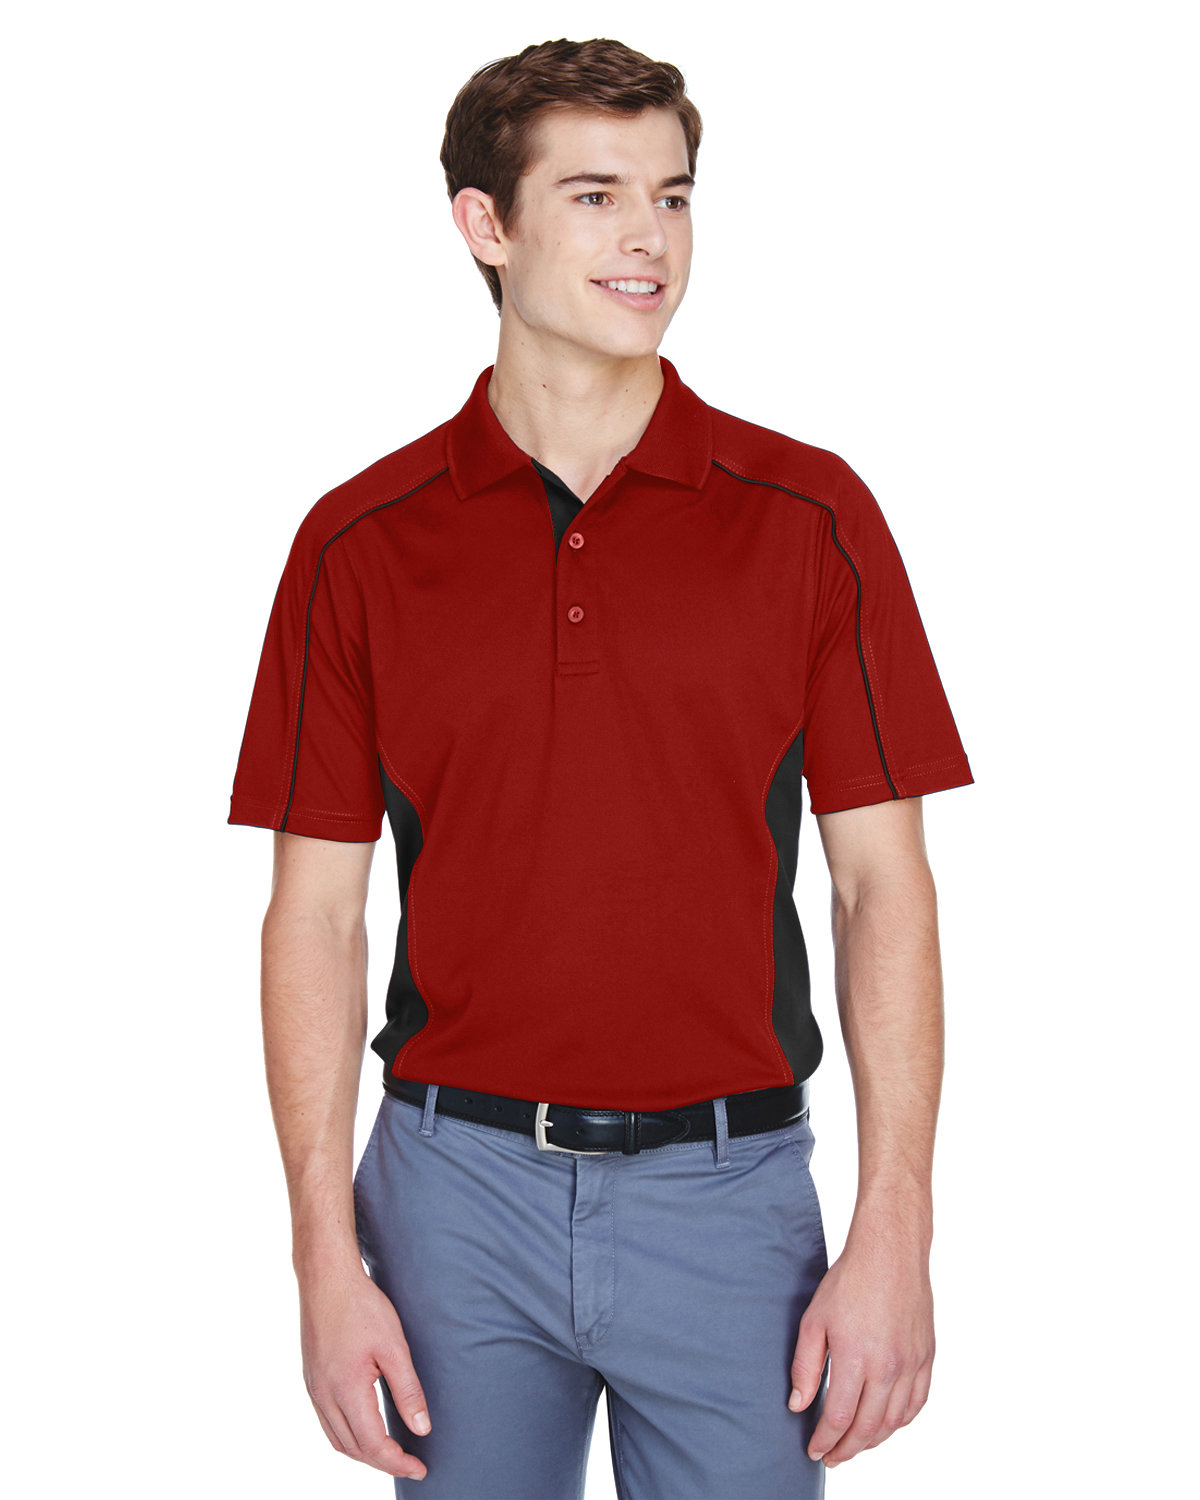 Extreme Men's Eperformance™ Fuse Snag Protection Plus Colorblock Polo CLASSIC RED/ BLK 